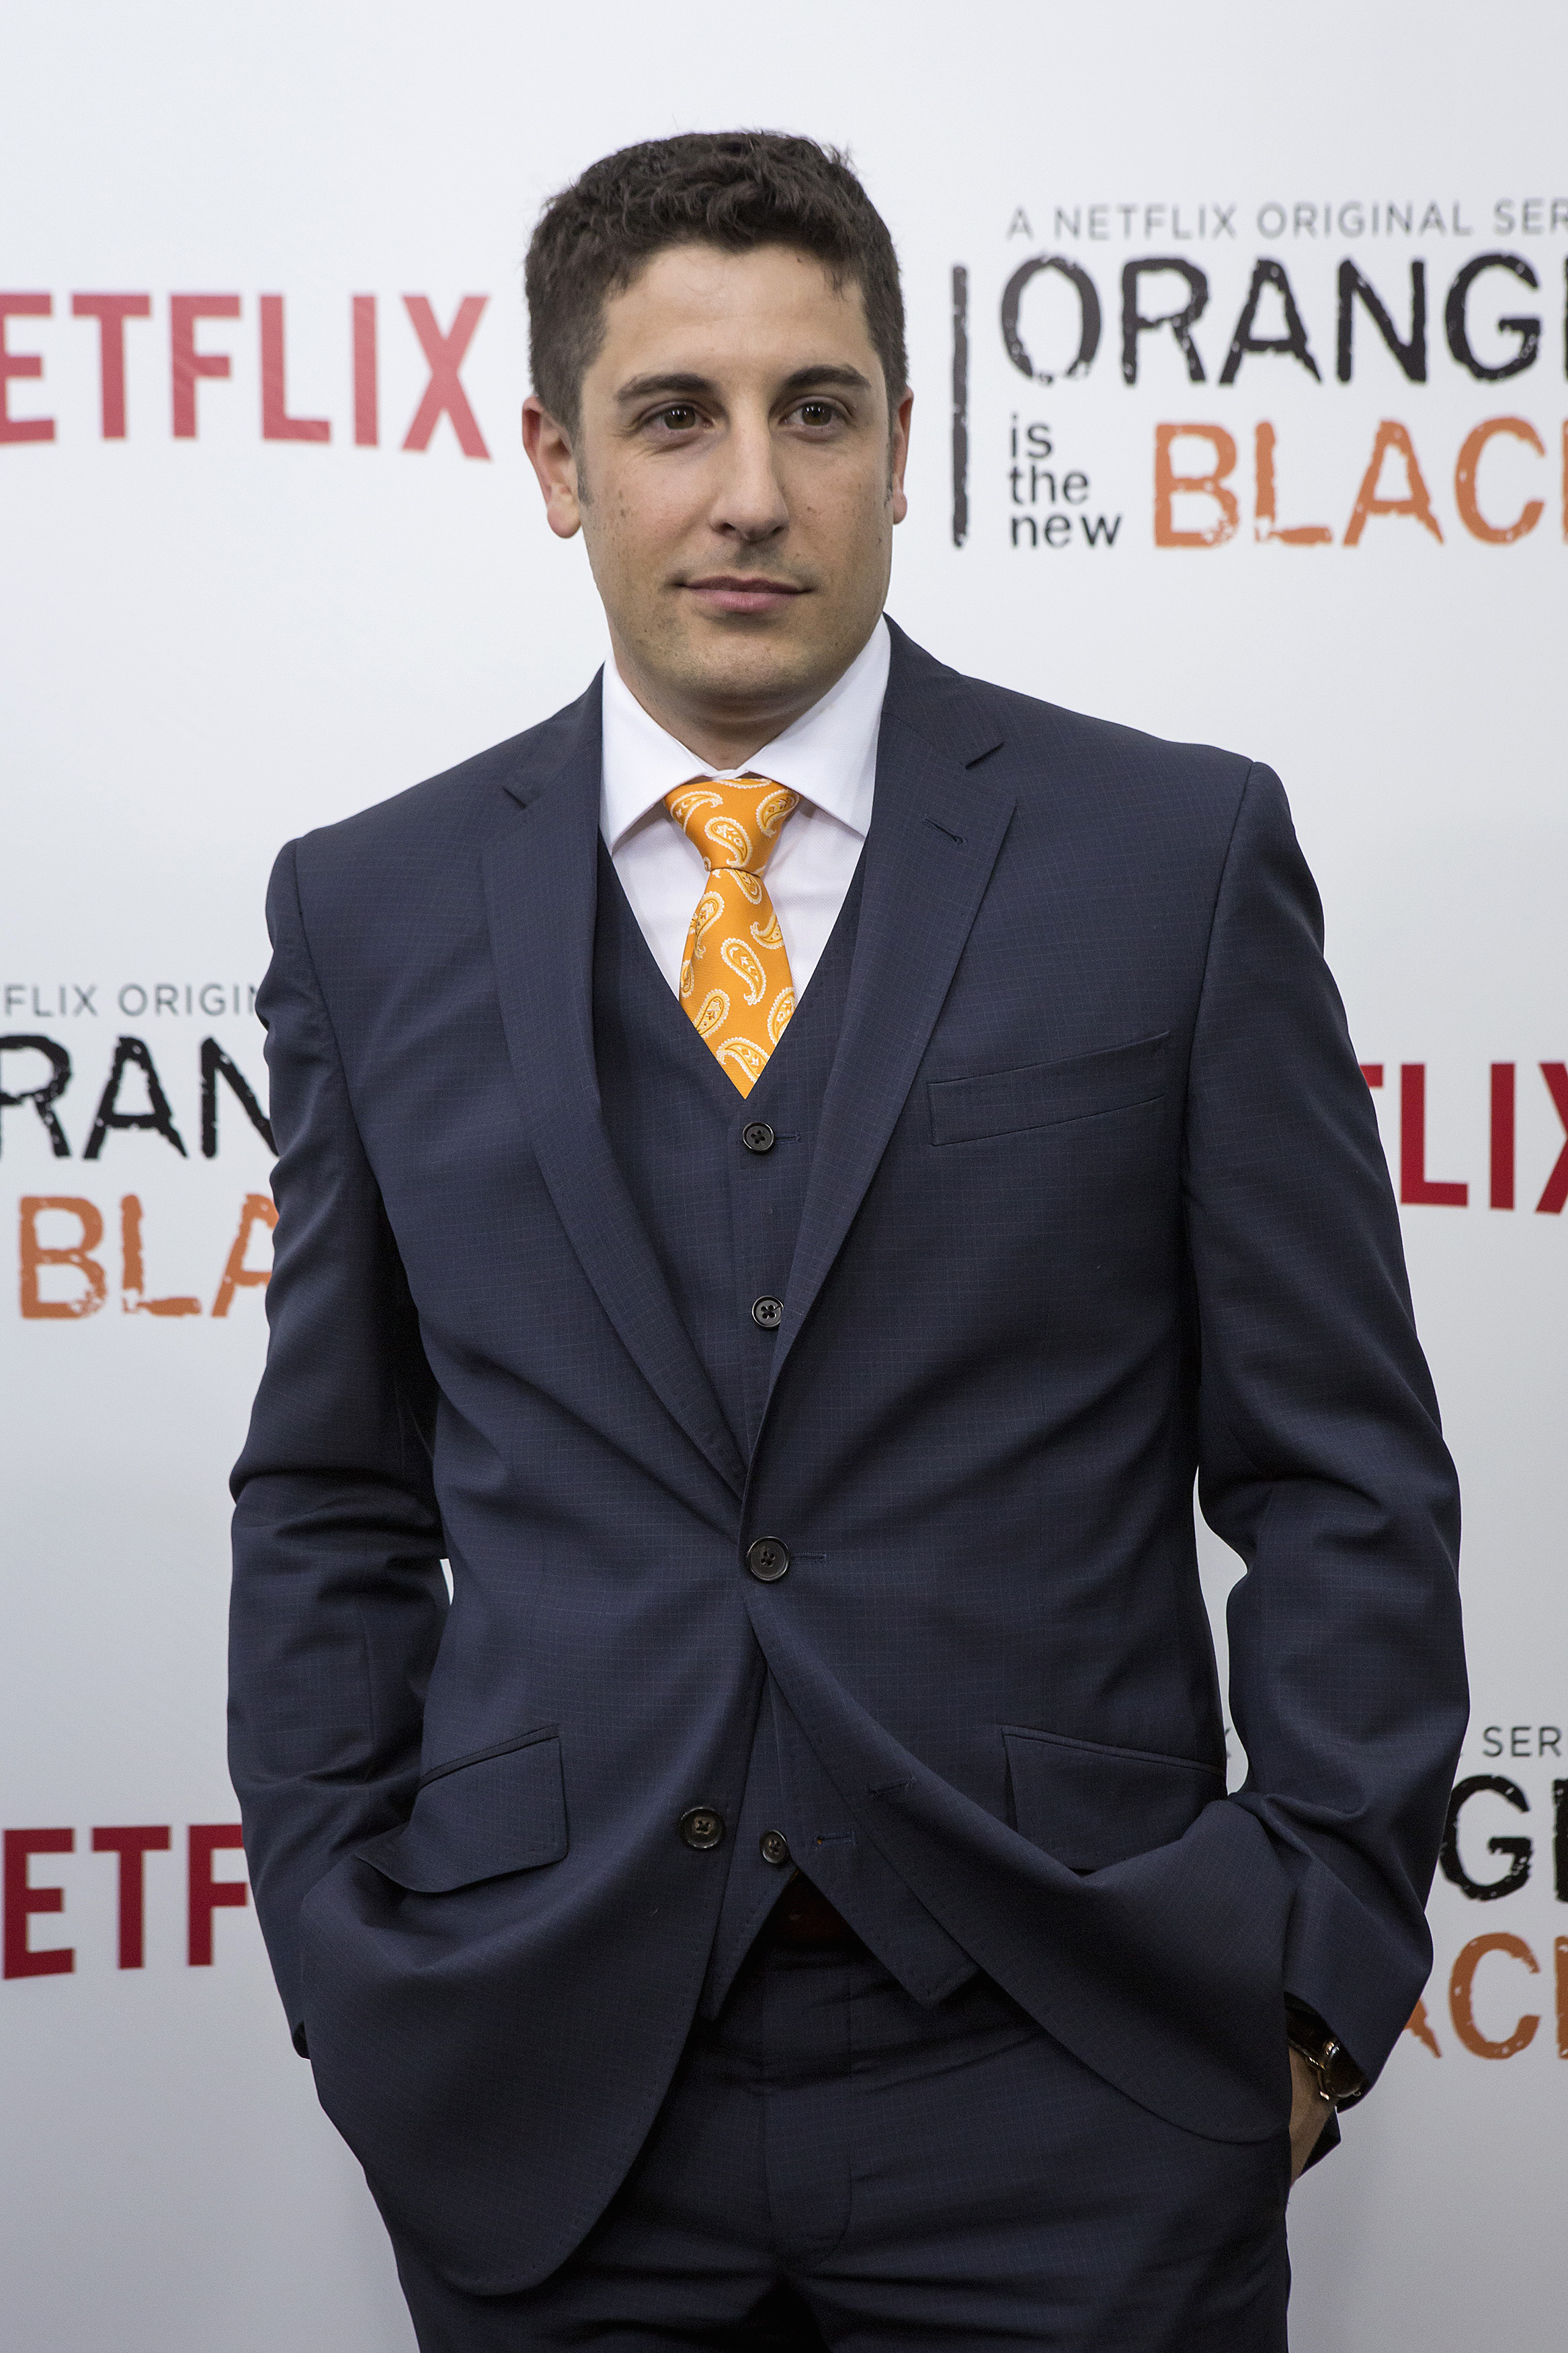 Cast member Jason Biggs attends the season two premiere of "Orange is the New Black" in New York on May 15, 2014. Biggs sparked public outrage after a series of controversial Twitter posts about Malaysia Airlines flight MH17 shortly after it crashed. (Eric Thayer&mdash;Reuters)